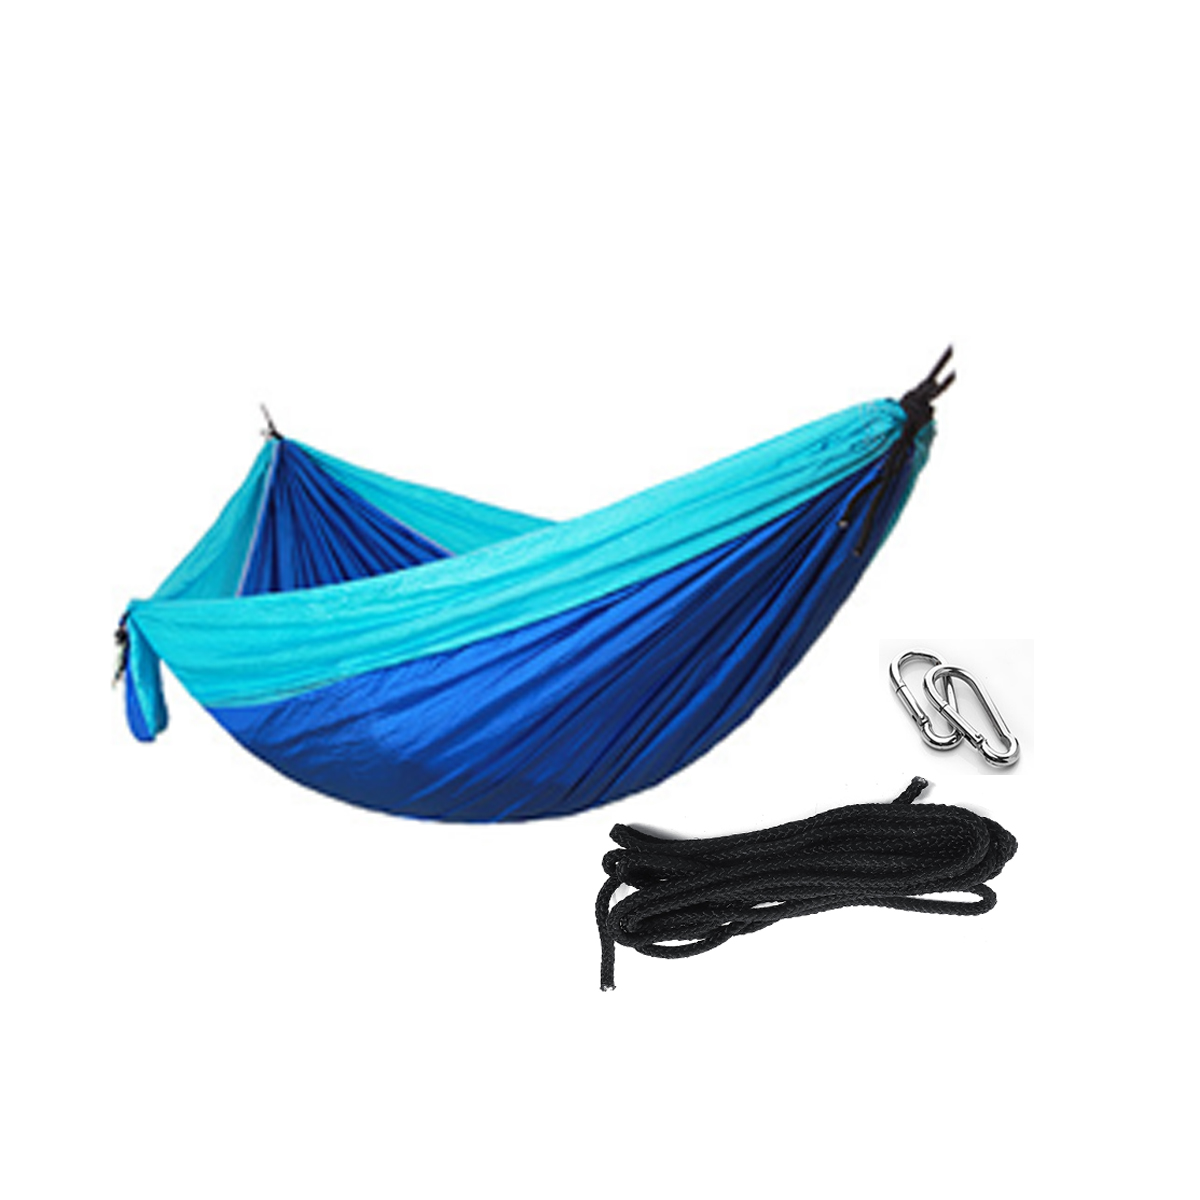 Outdoor-Travel-Double-Person-Hanging-Hammock-Max-Load-200KG-Portable-Camping-Hammock-Bed-1514882-2